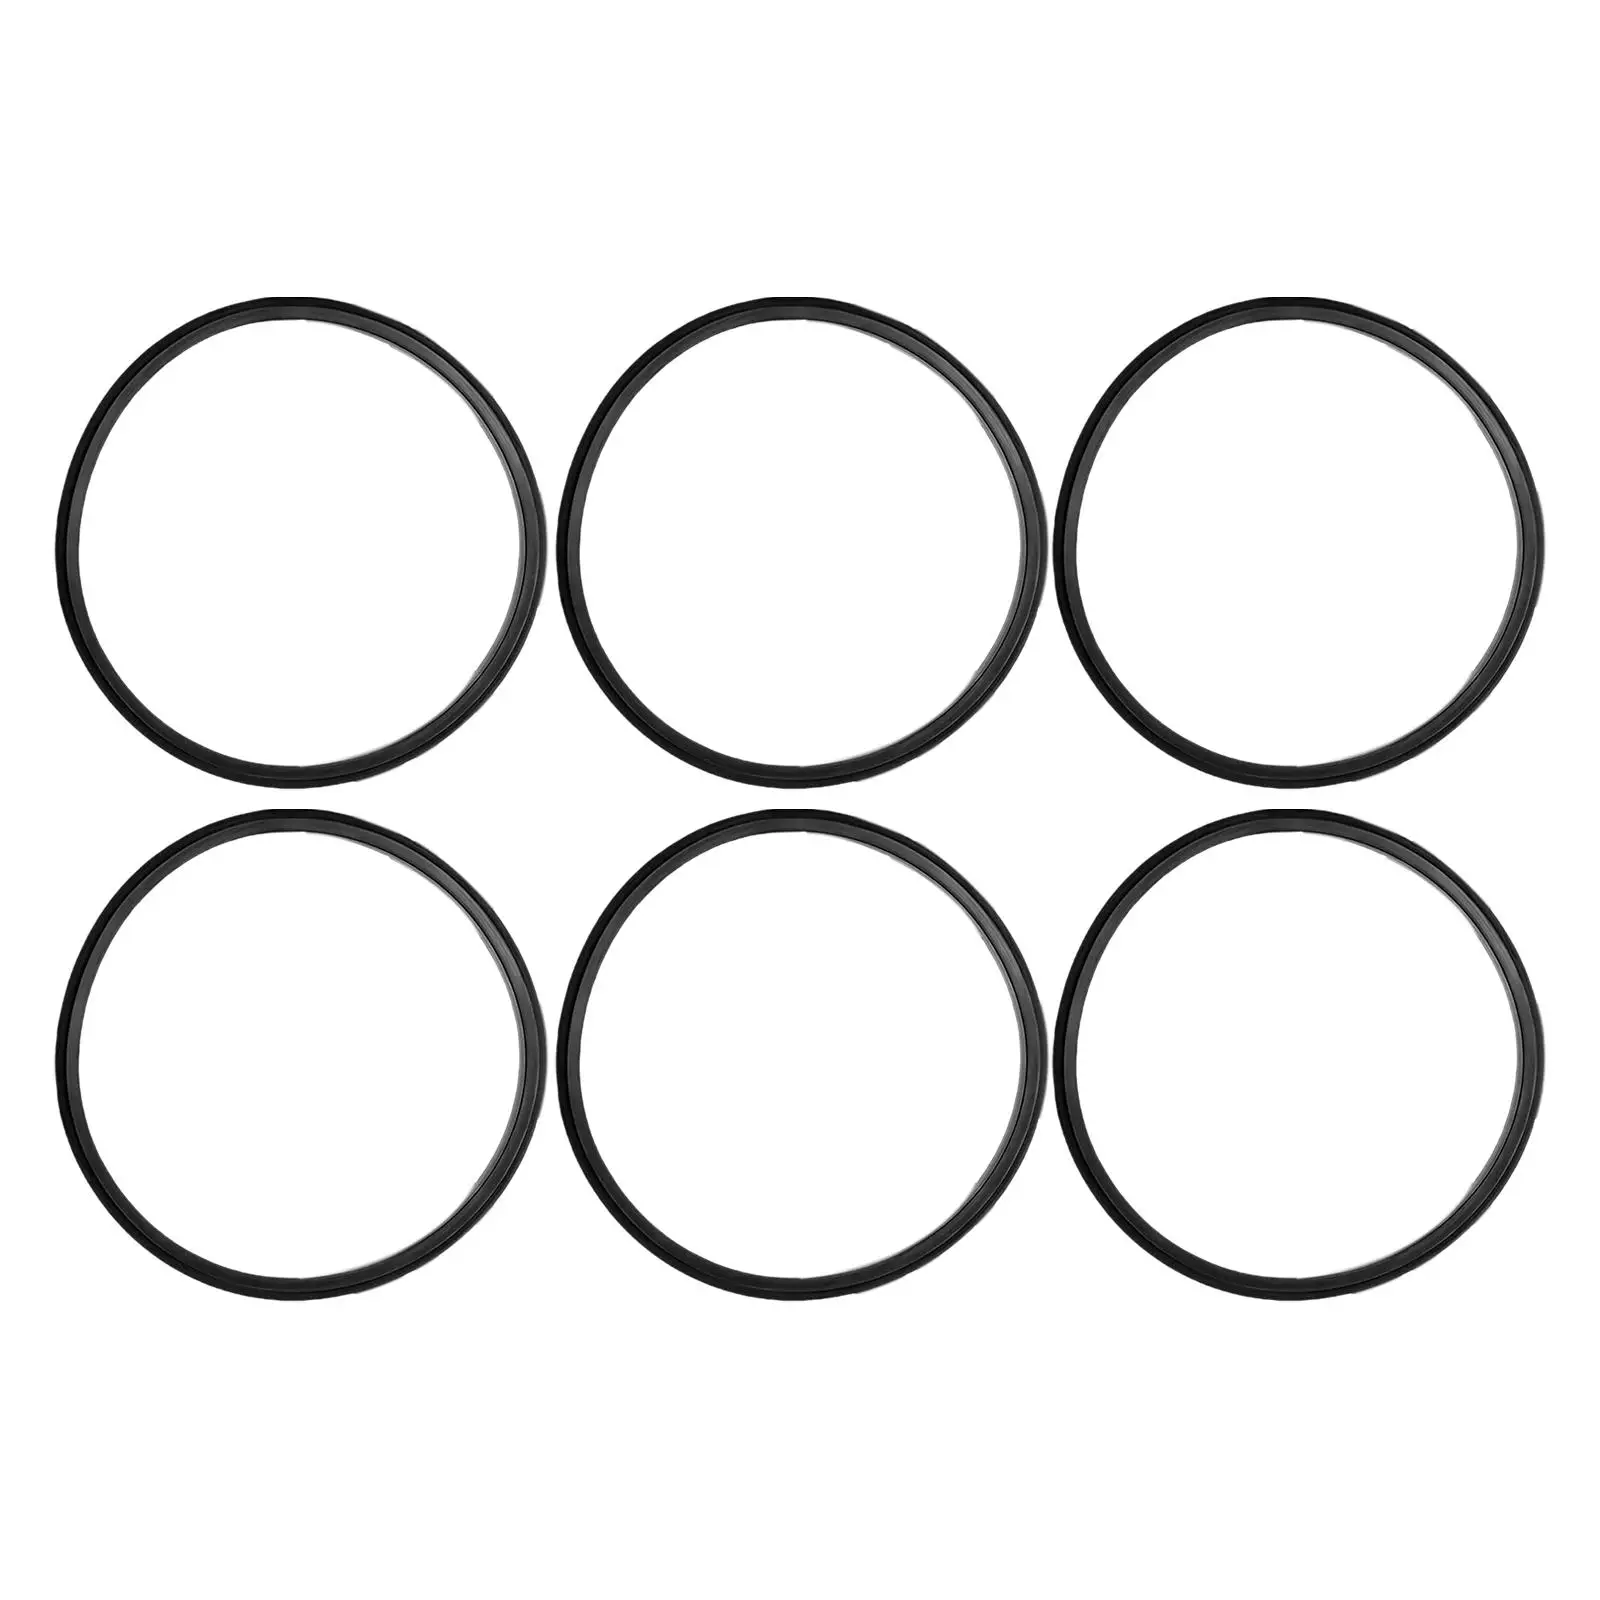 6x Silicone Jar Gasket Silicone Replacement Gasket Sket Replacement Silicone Sealing Ring for Glass Jars Food Containers